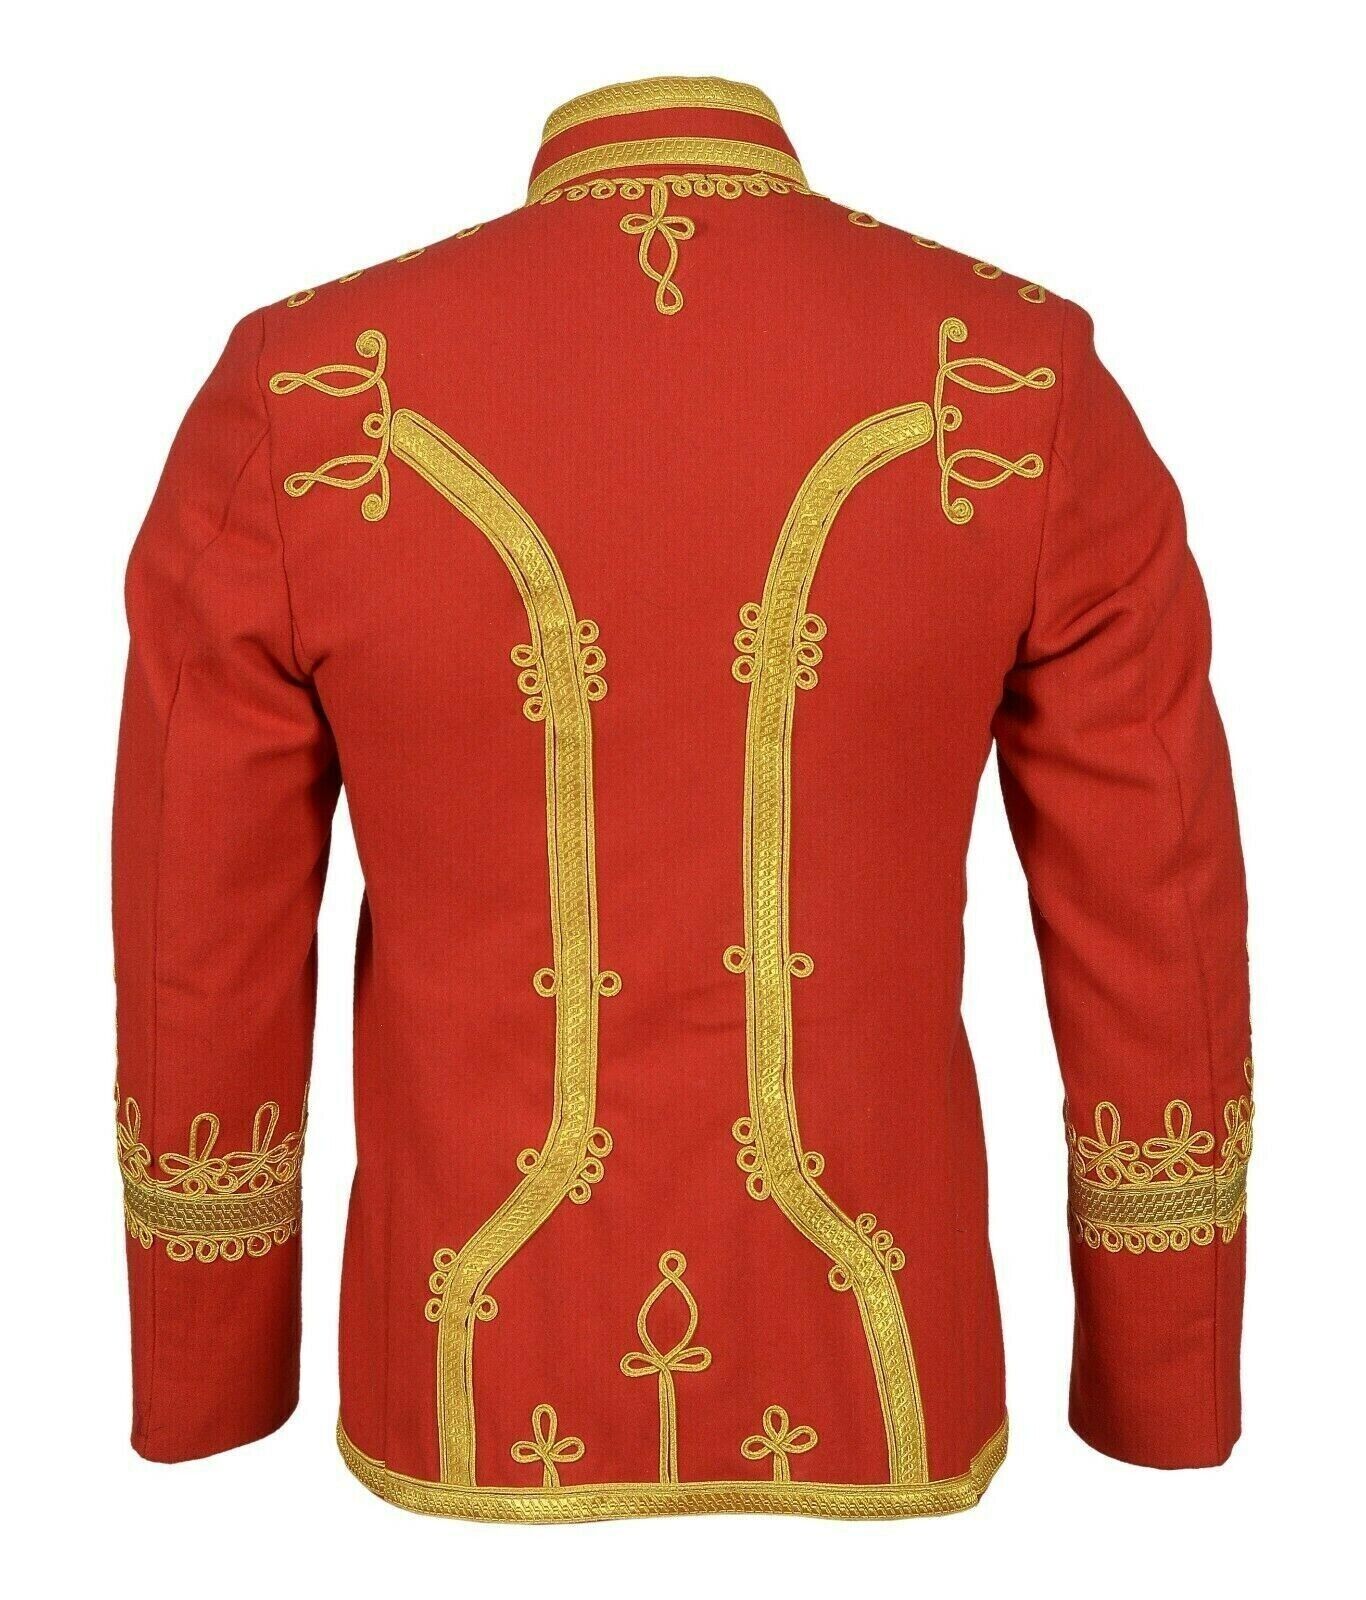 New Hussar Napoleonic Military Style Tunic Red Wool Men’s Jacket